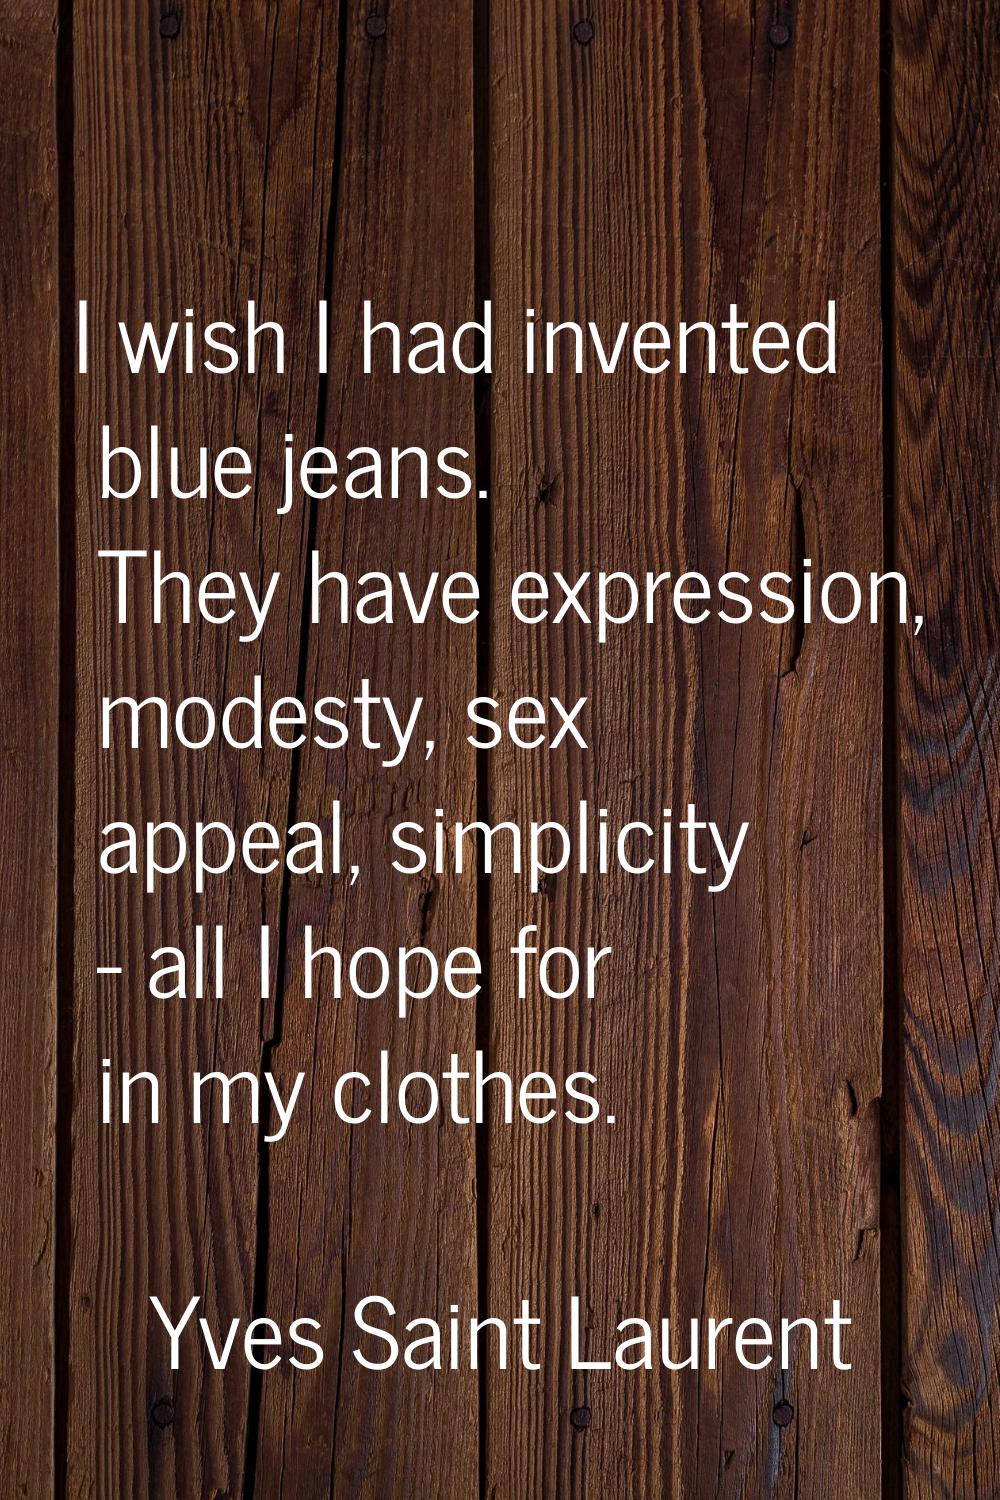 I wish I had invented blue jeans. They have expression, modesty, sex appeal, simplicity - all I hop